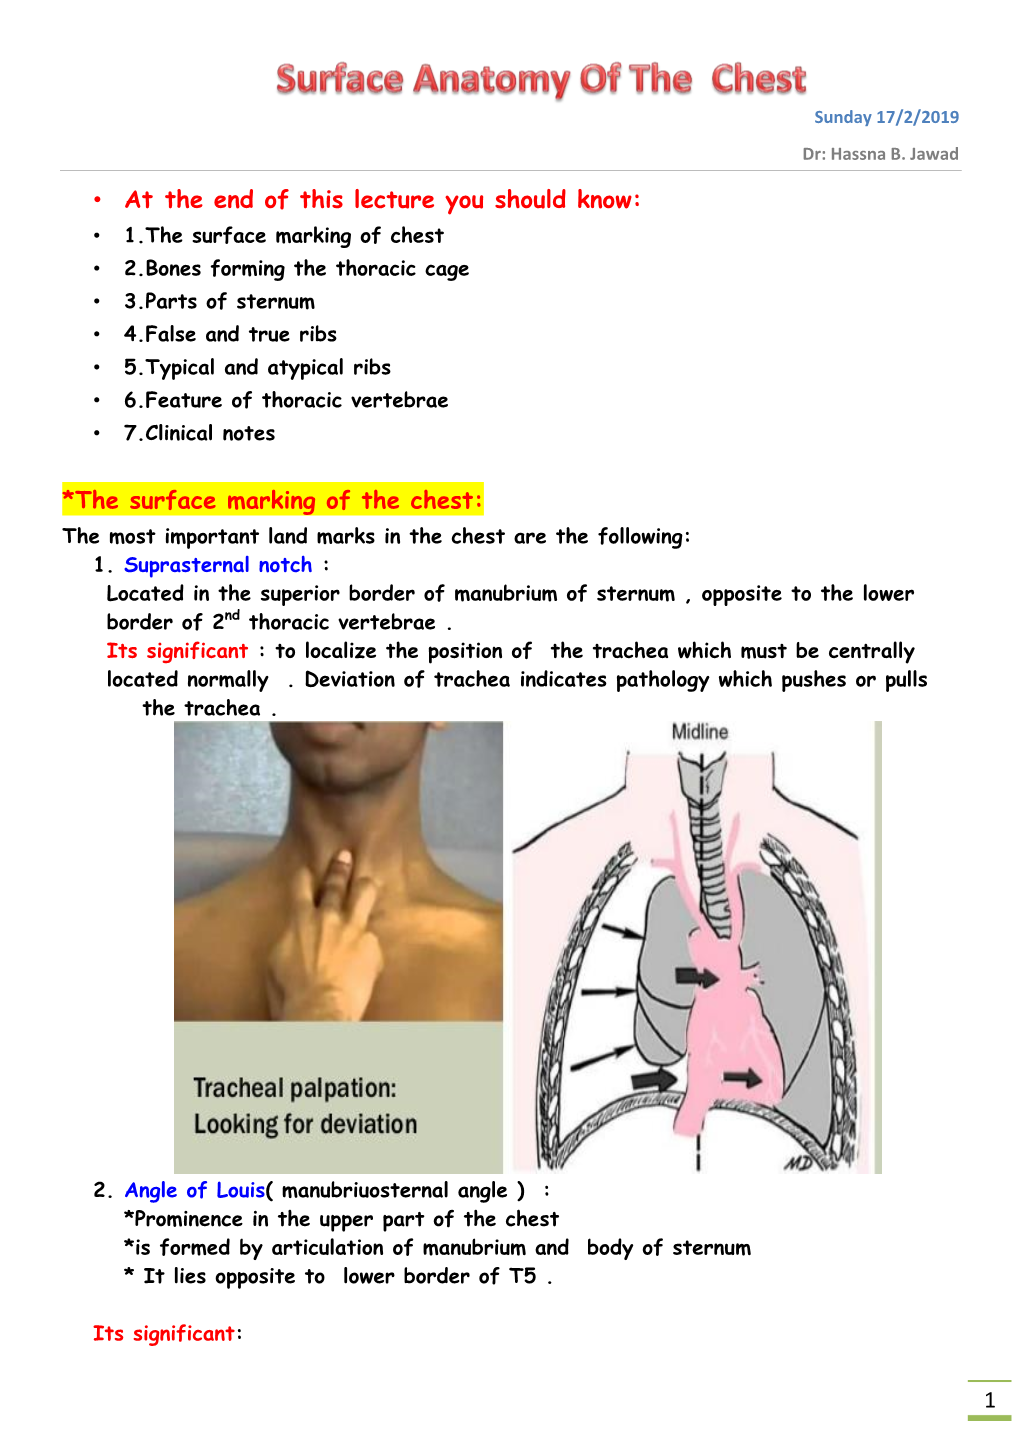 Surface Anatomy of the Chest